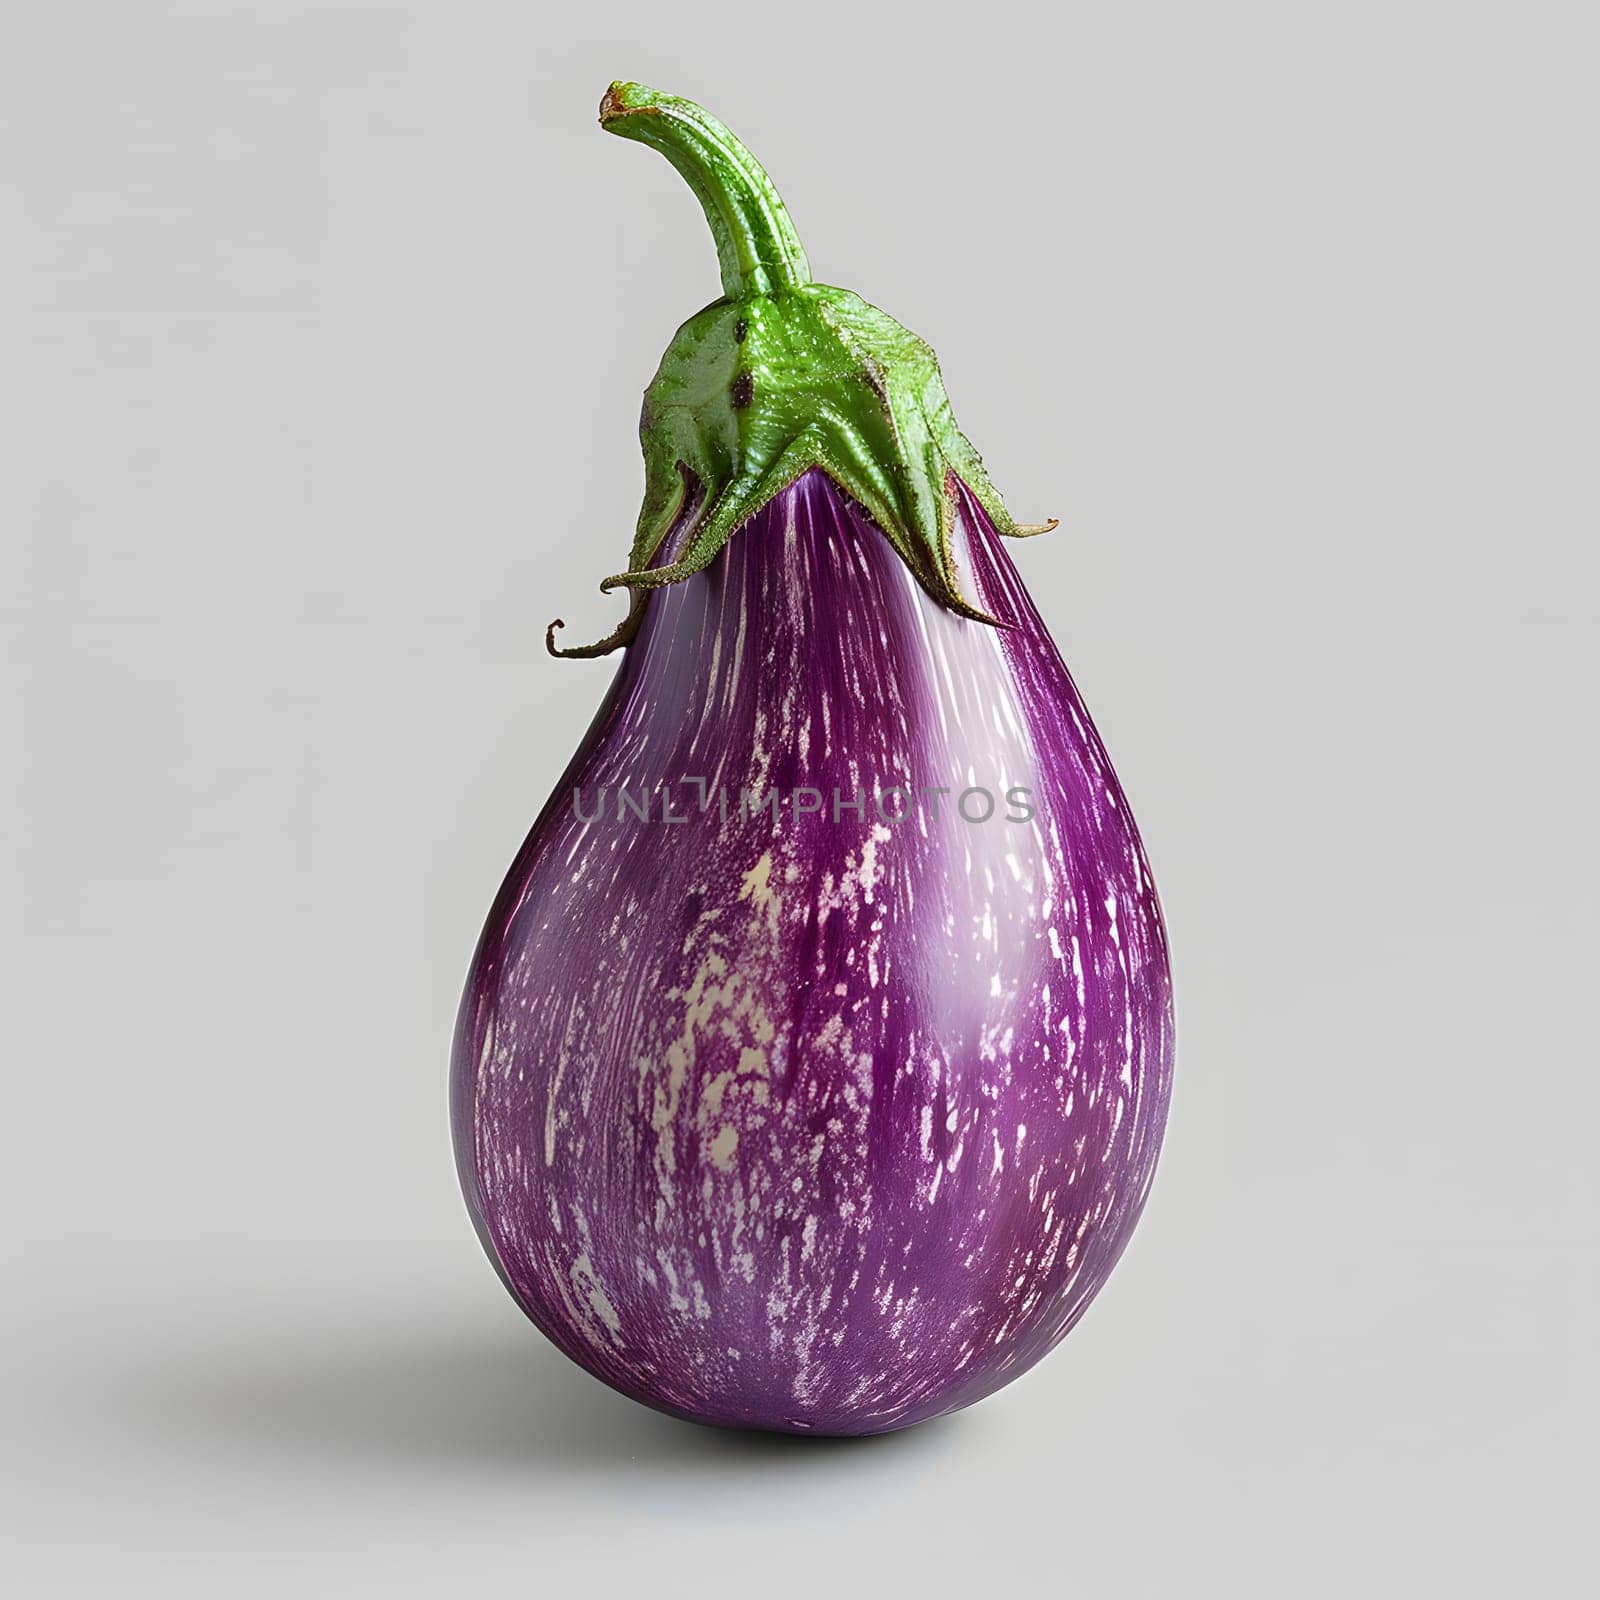 A staple food ingredient, the purple eggplant is a natural food plant with a magenta flowering produce. Its green stem stands out against a gray background